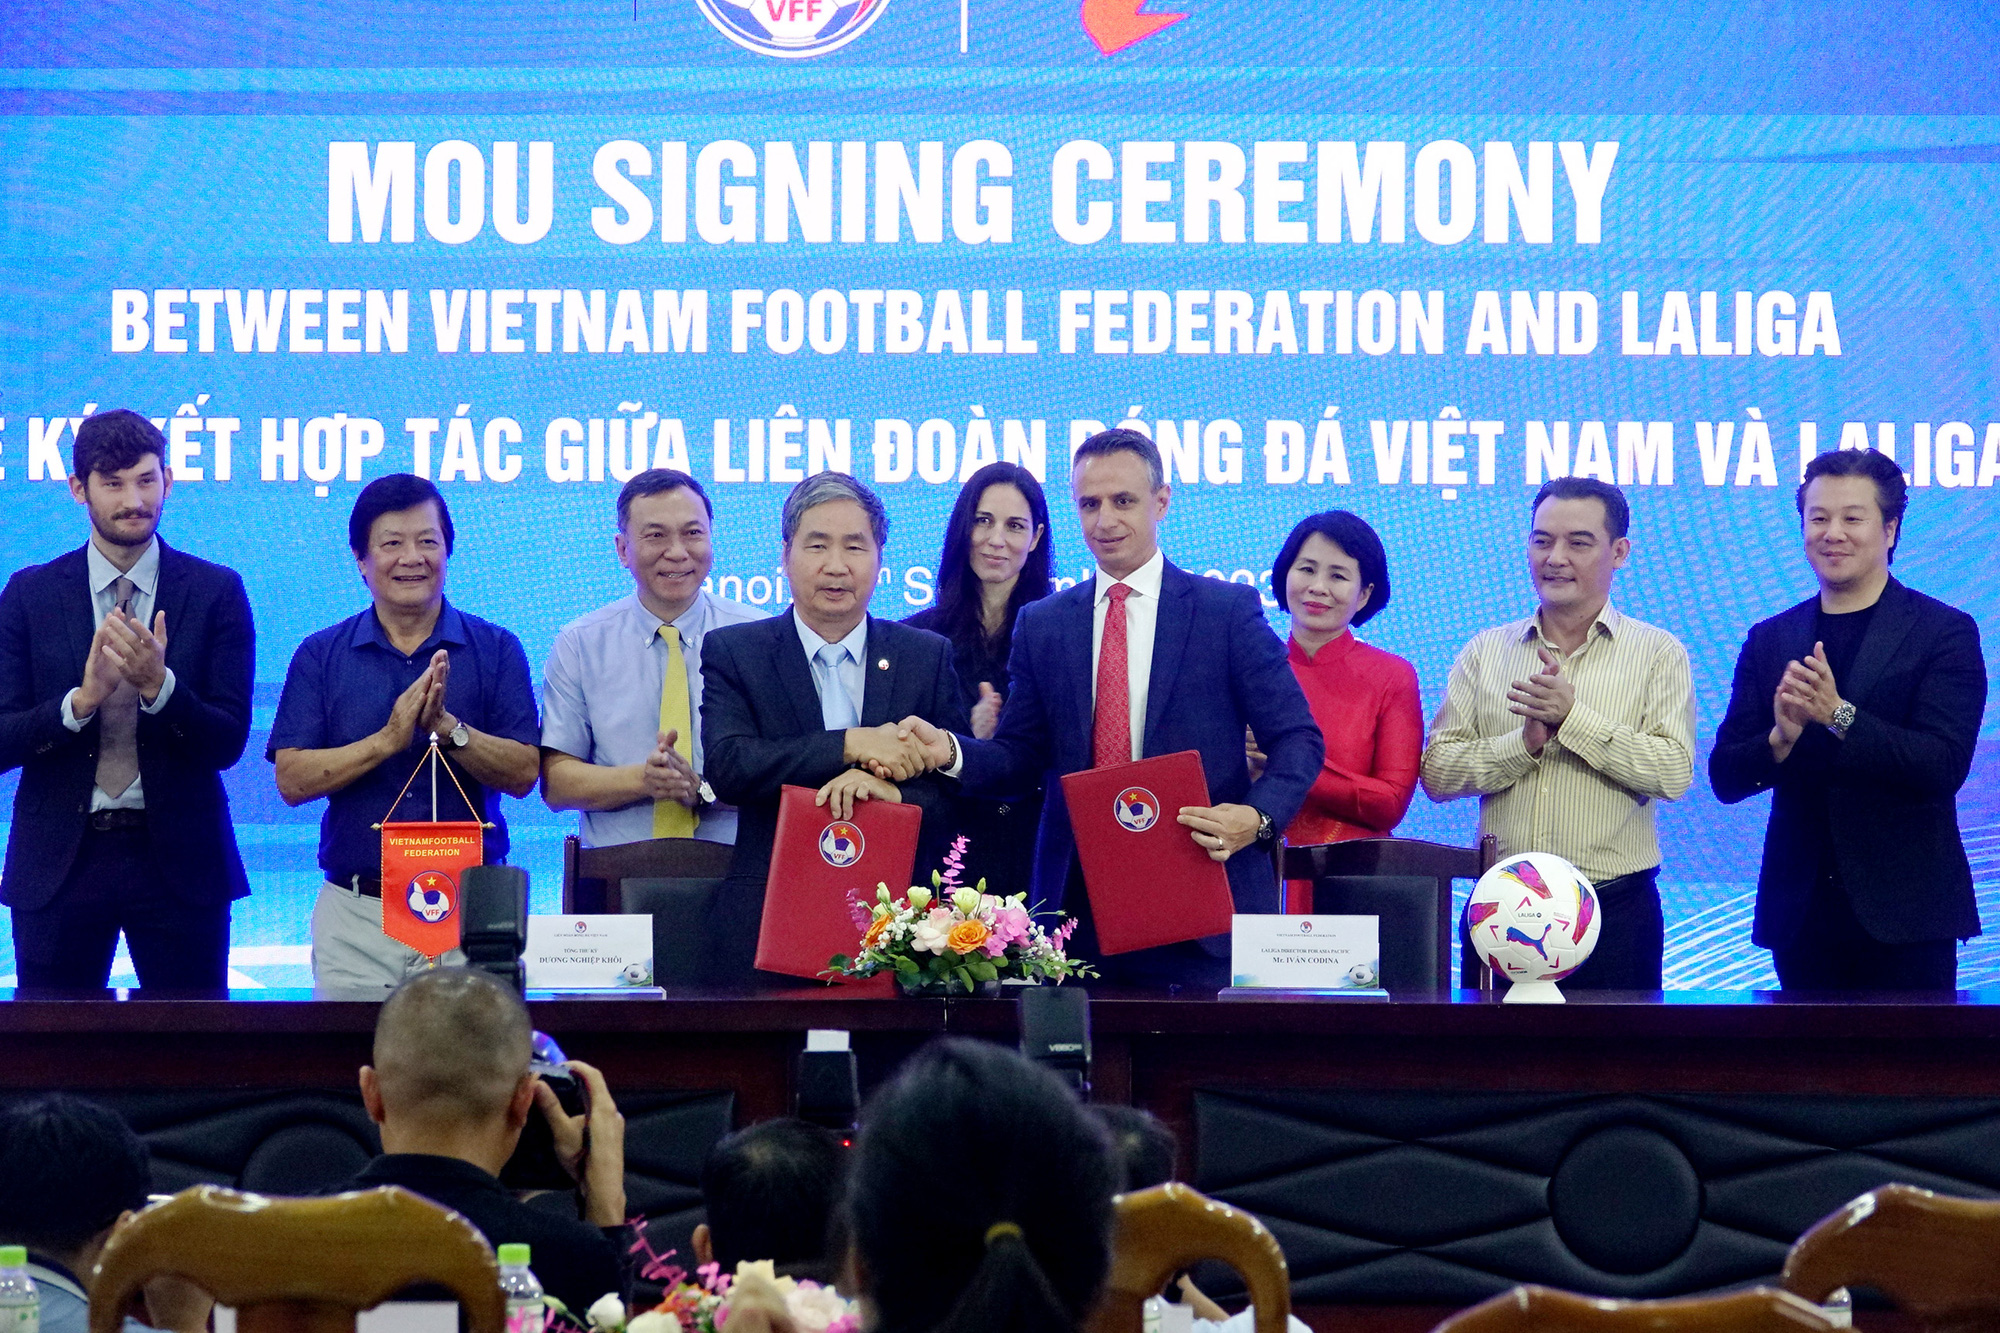 Vietnam Football Federation to cooperate with LaLiga to train coaches, players